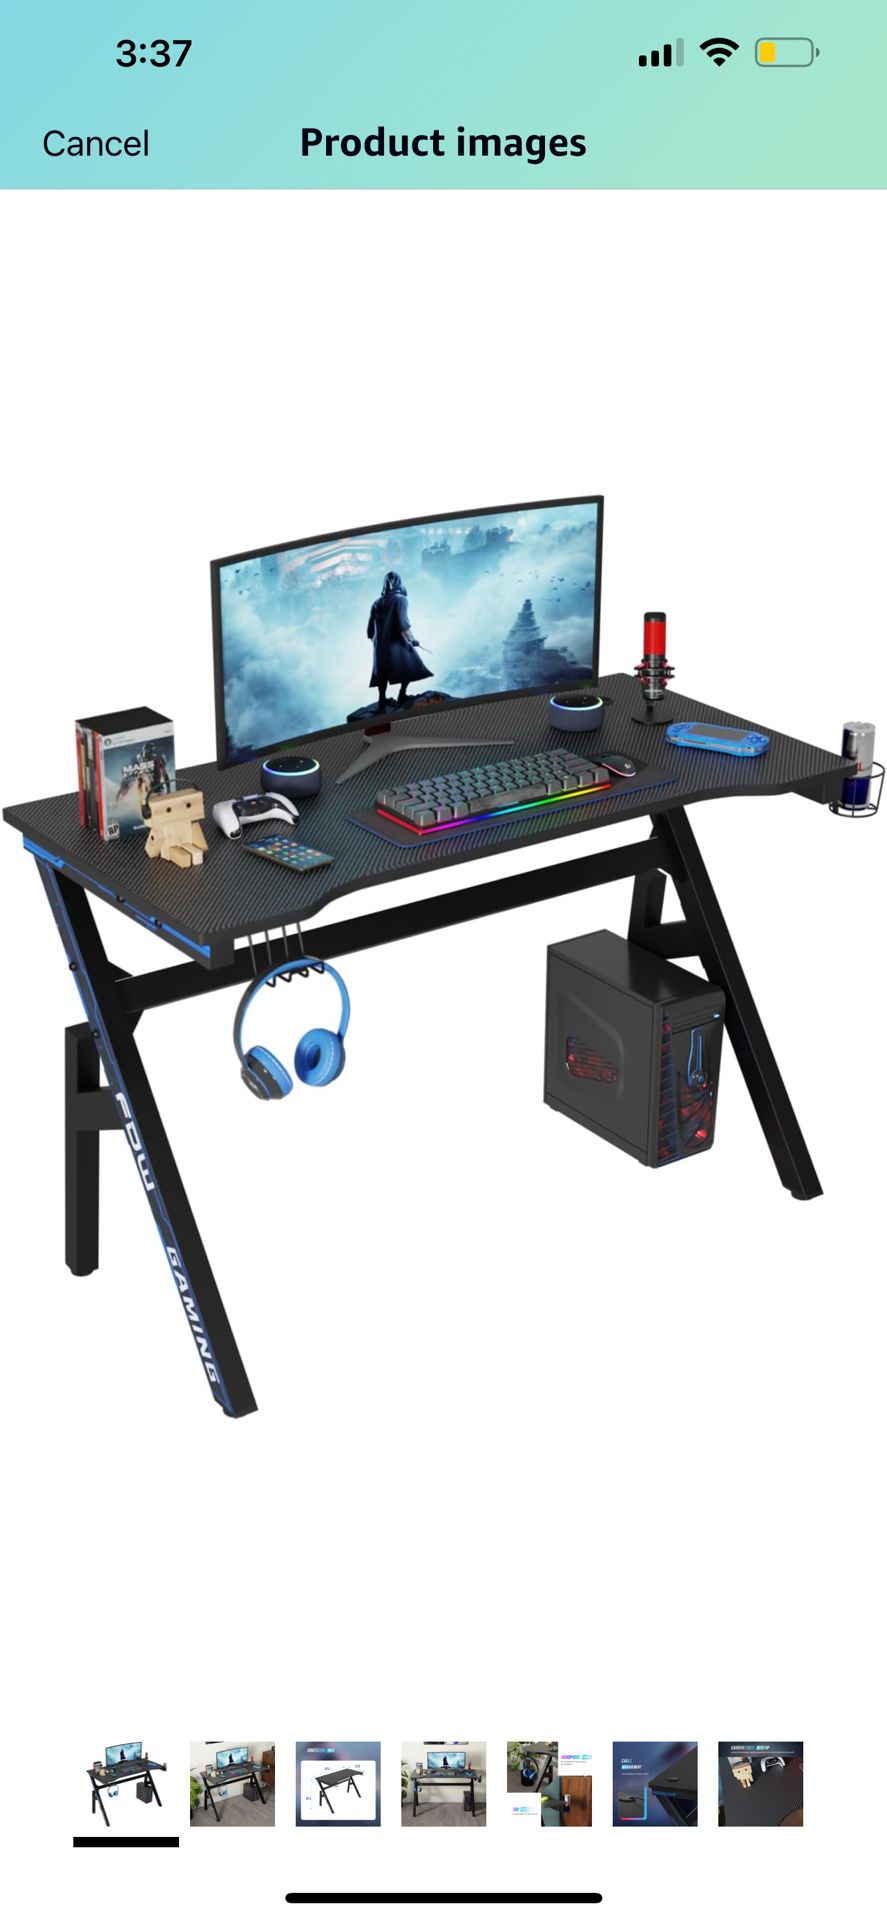 Gaming Computer Desk/Table (Used for 1.5 months) Move out sale by the end of April.